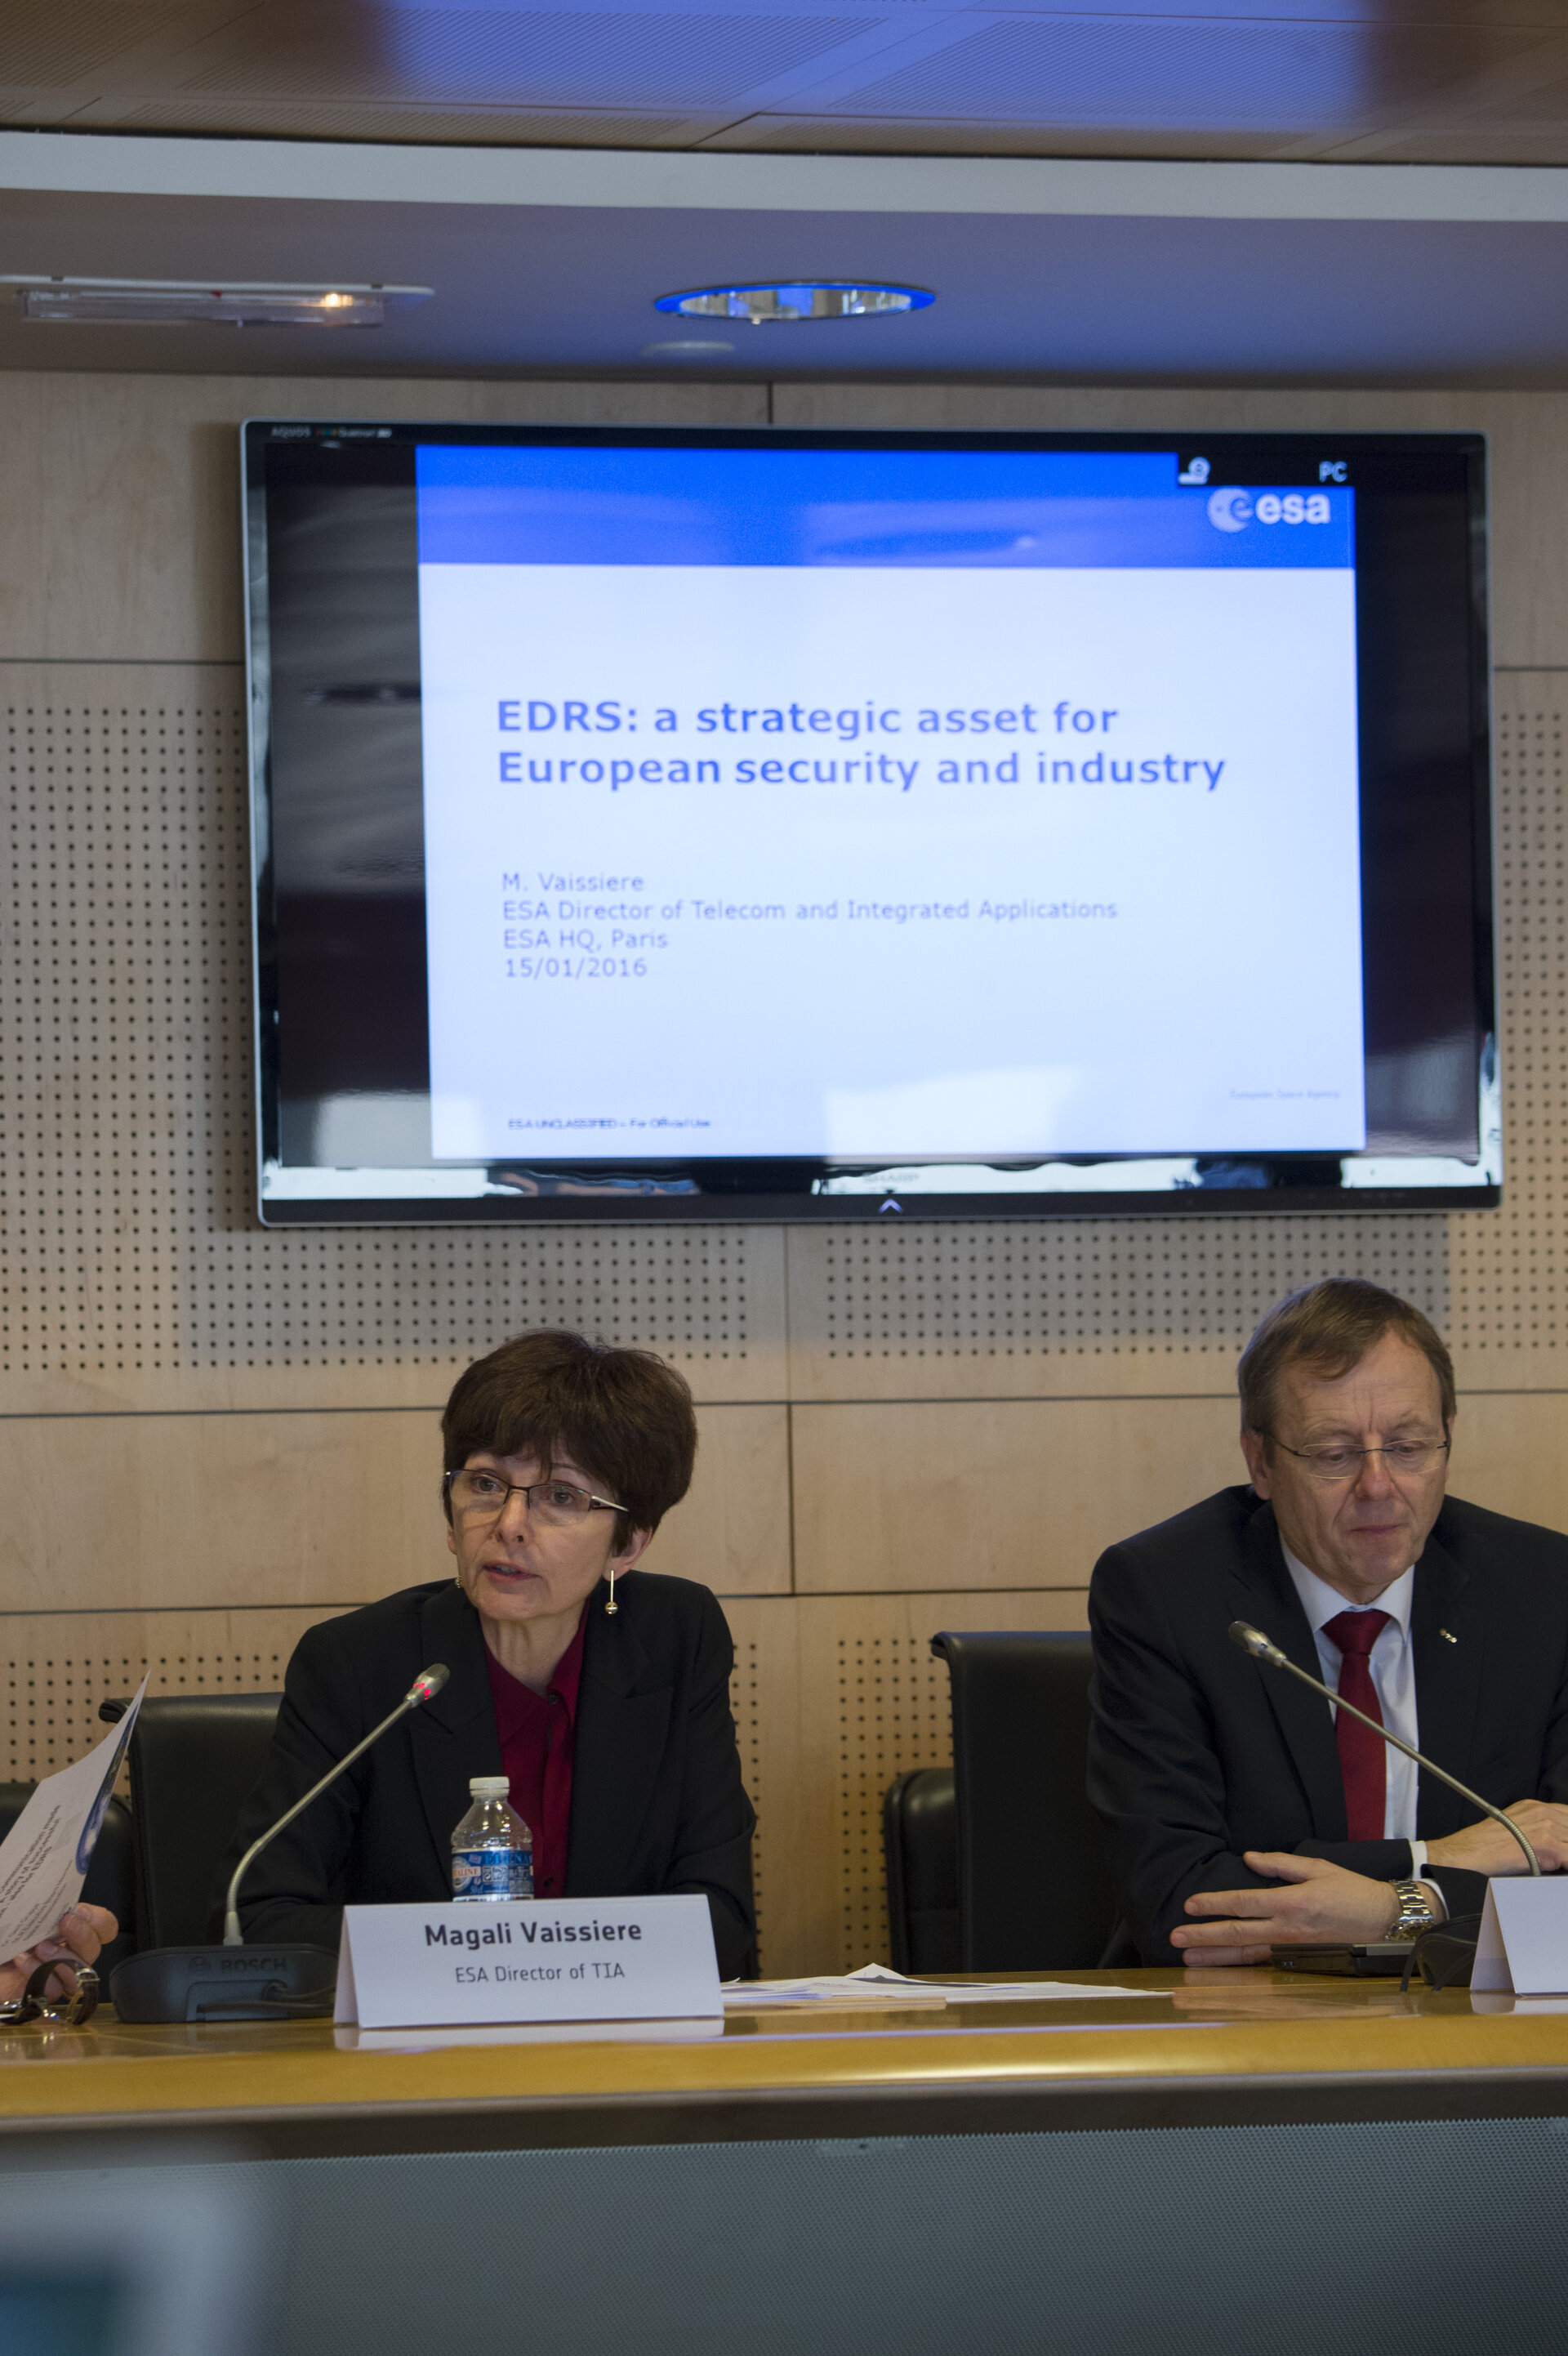 Magali Vaissiere during the EDRS press briefing on 15 January 2016